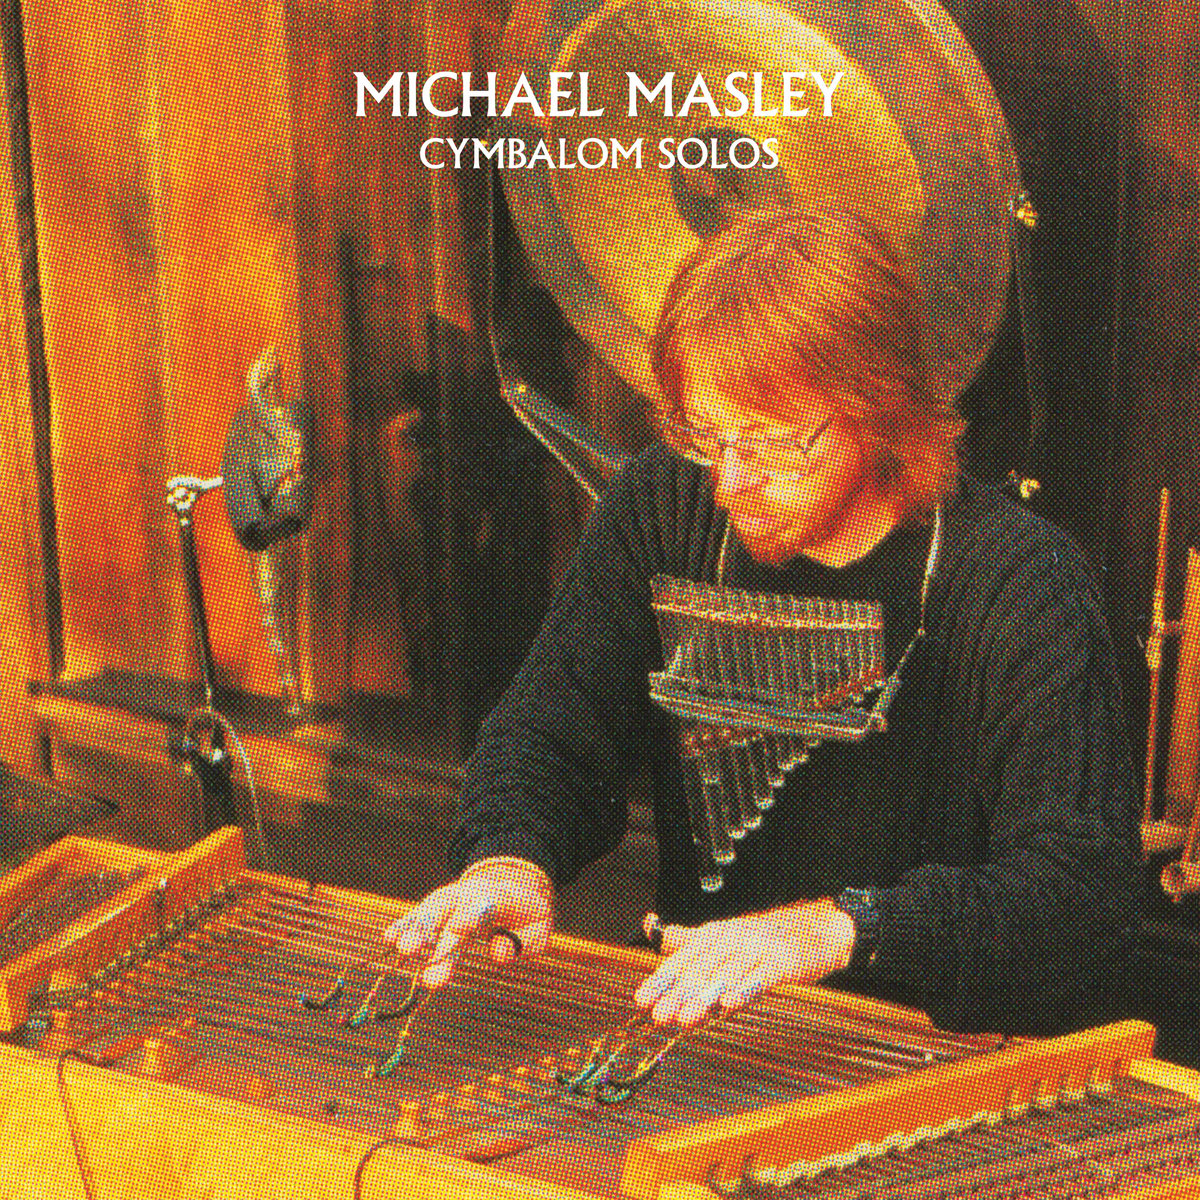 Michael Masley - Cymbalom Solos LP